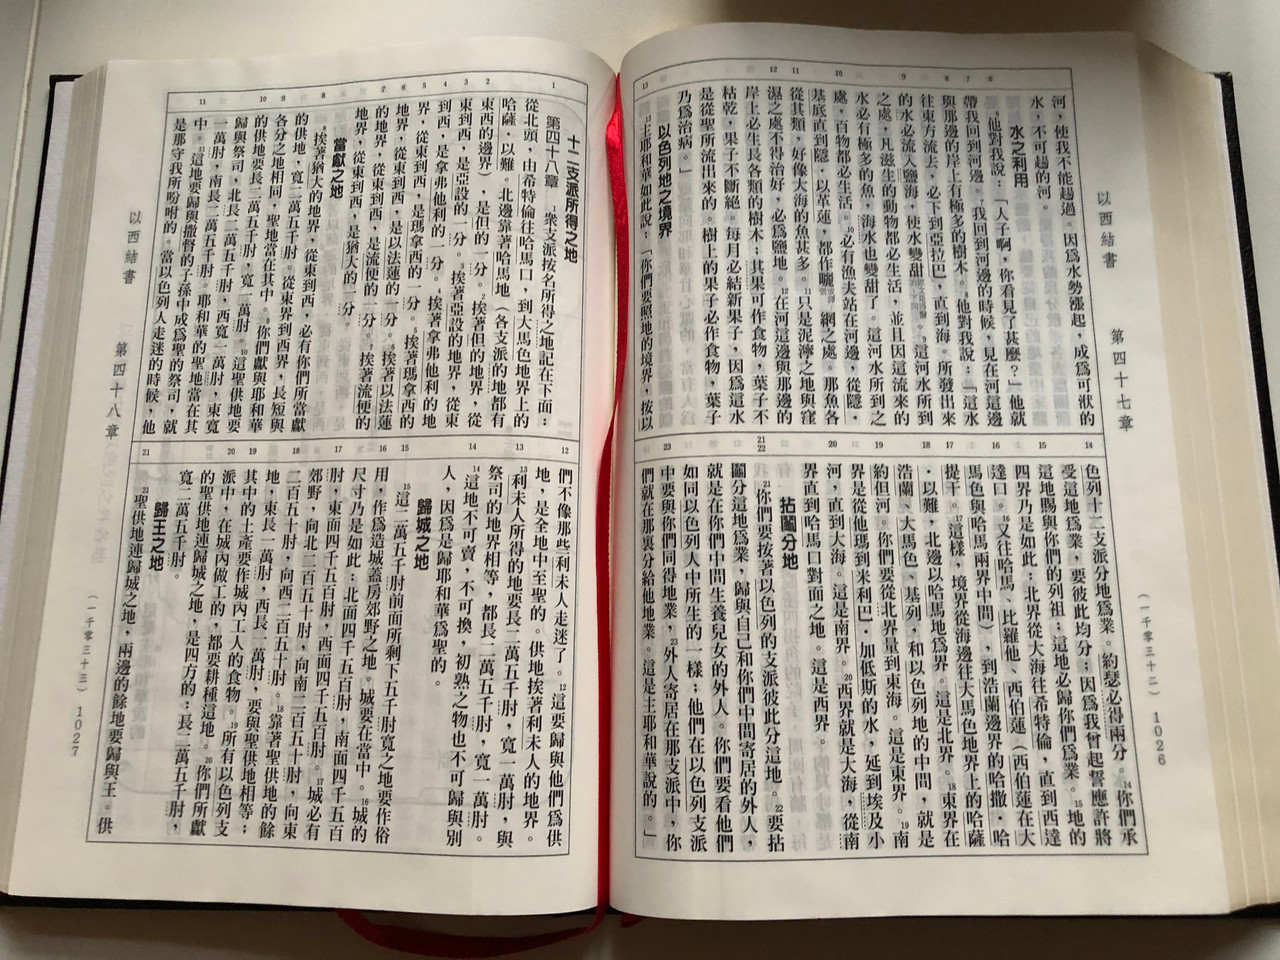 https://cdn10.bigcommerce.com/s-62bdpkt7pb/products/50660/images/258386/Chinese_Shen_Edition_Holy_Bible_11__71999.1668177208.1280.1280.JPG?c=2